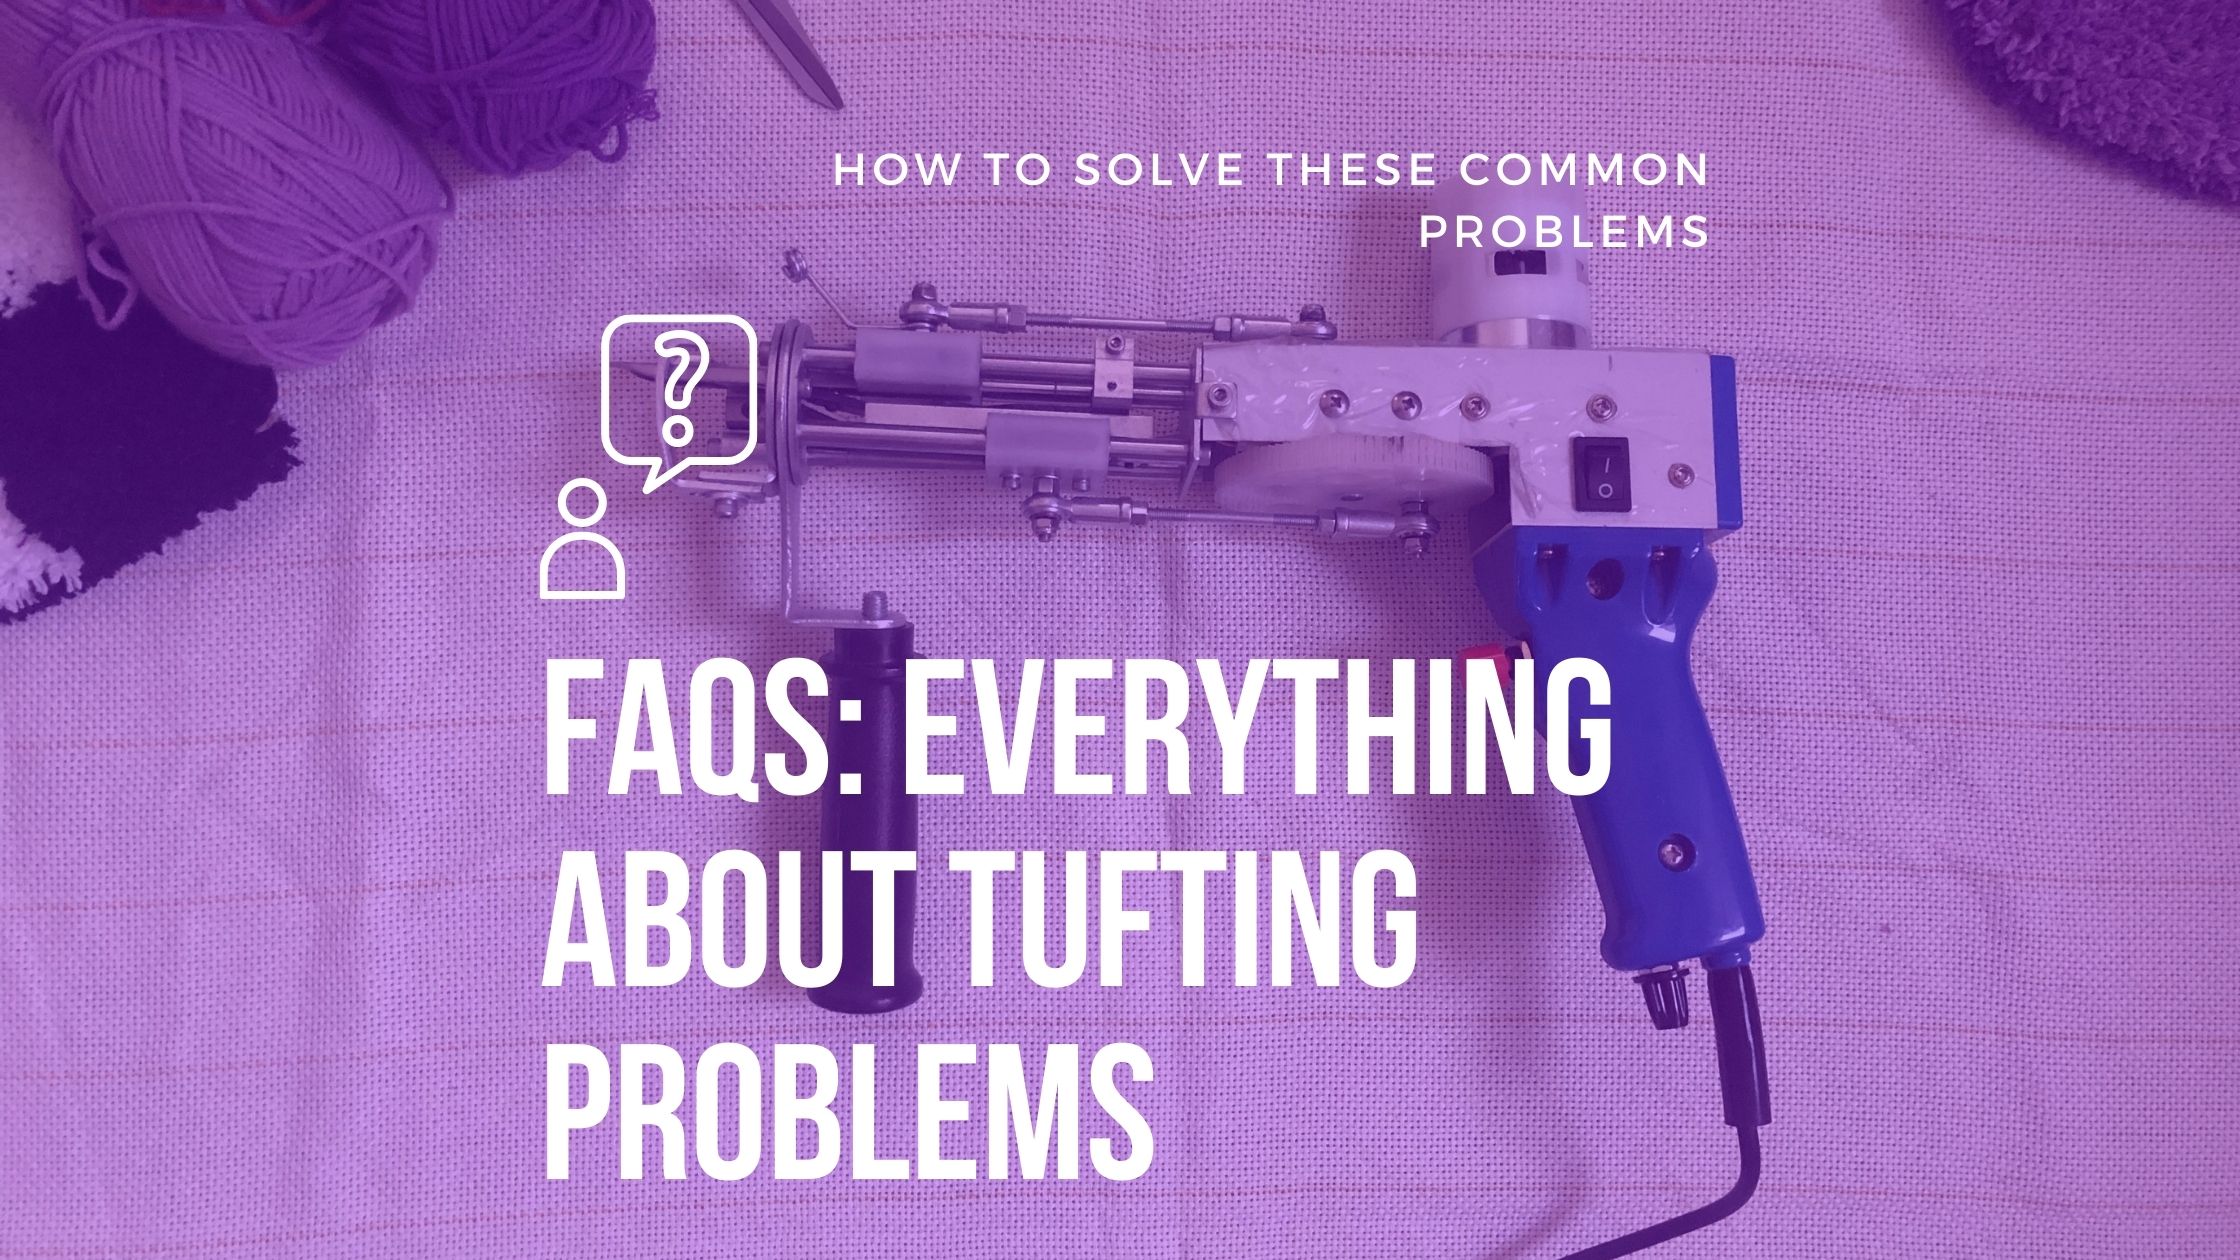 FAQs: Everything About Tufting Problems